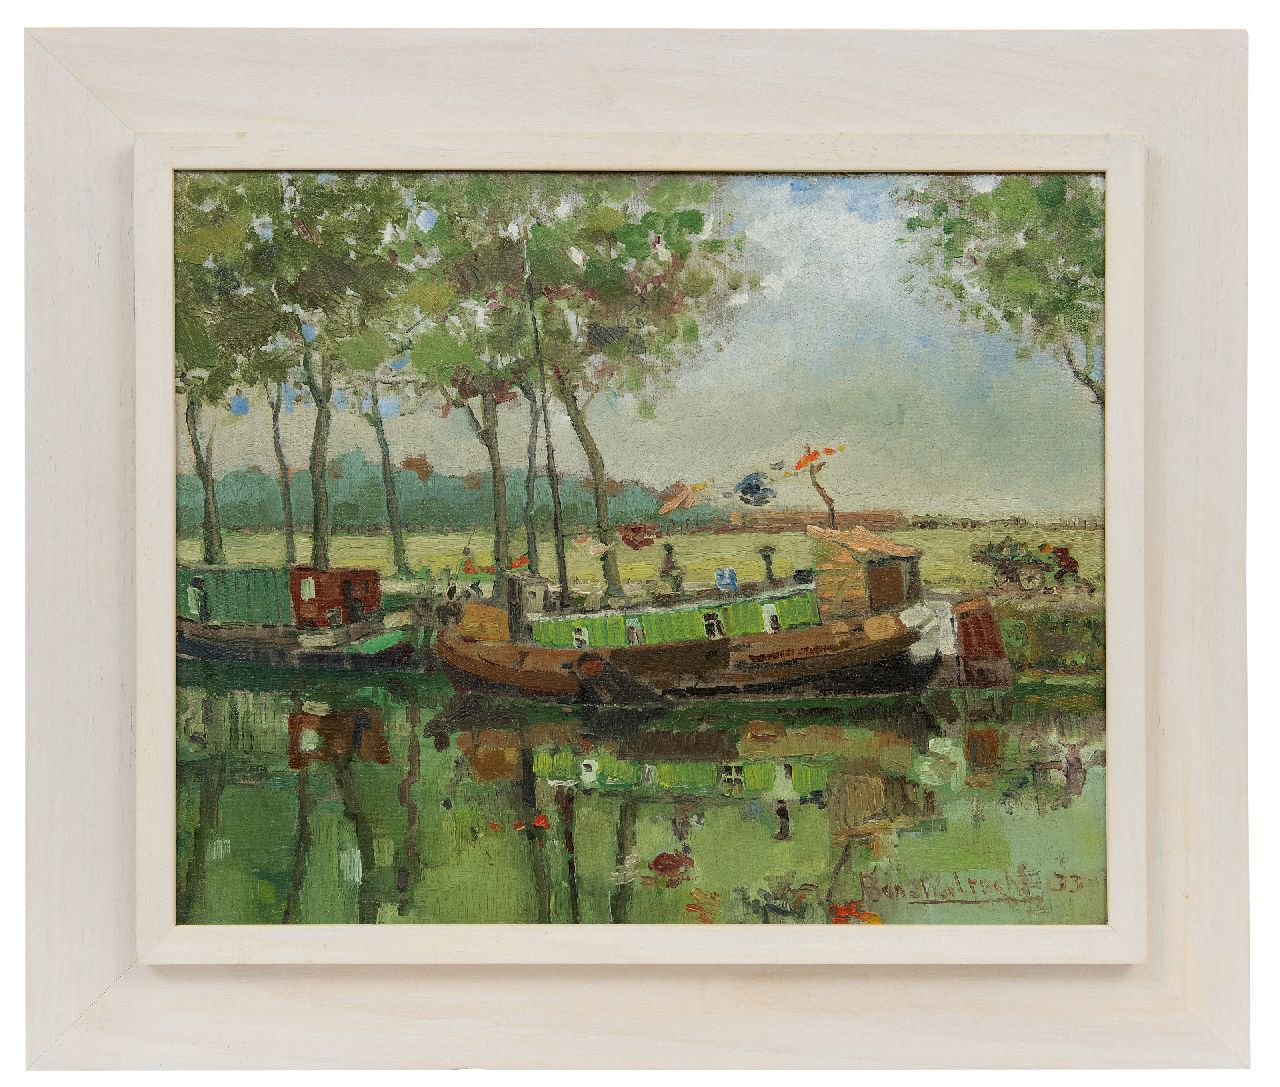 Walrecht B.H.D.  | Bernardus Hermannus David 'Ben' Walrecht, At Oldehove, oil on canvas laid down on panel 40.4 x 50.0 cm, signed l.r. and dated '33